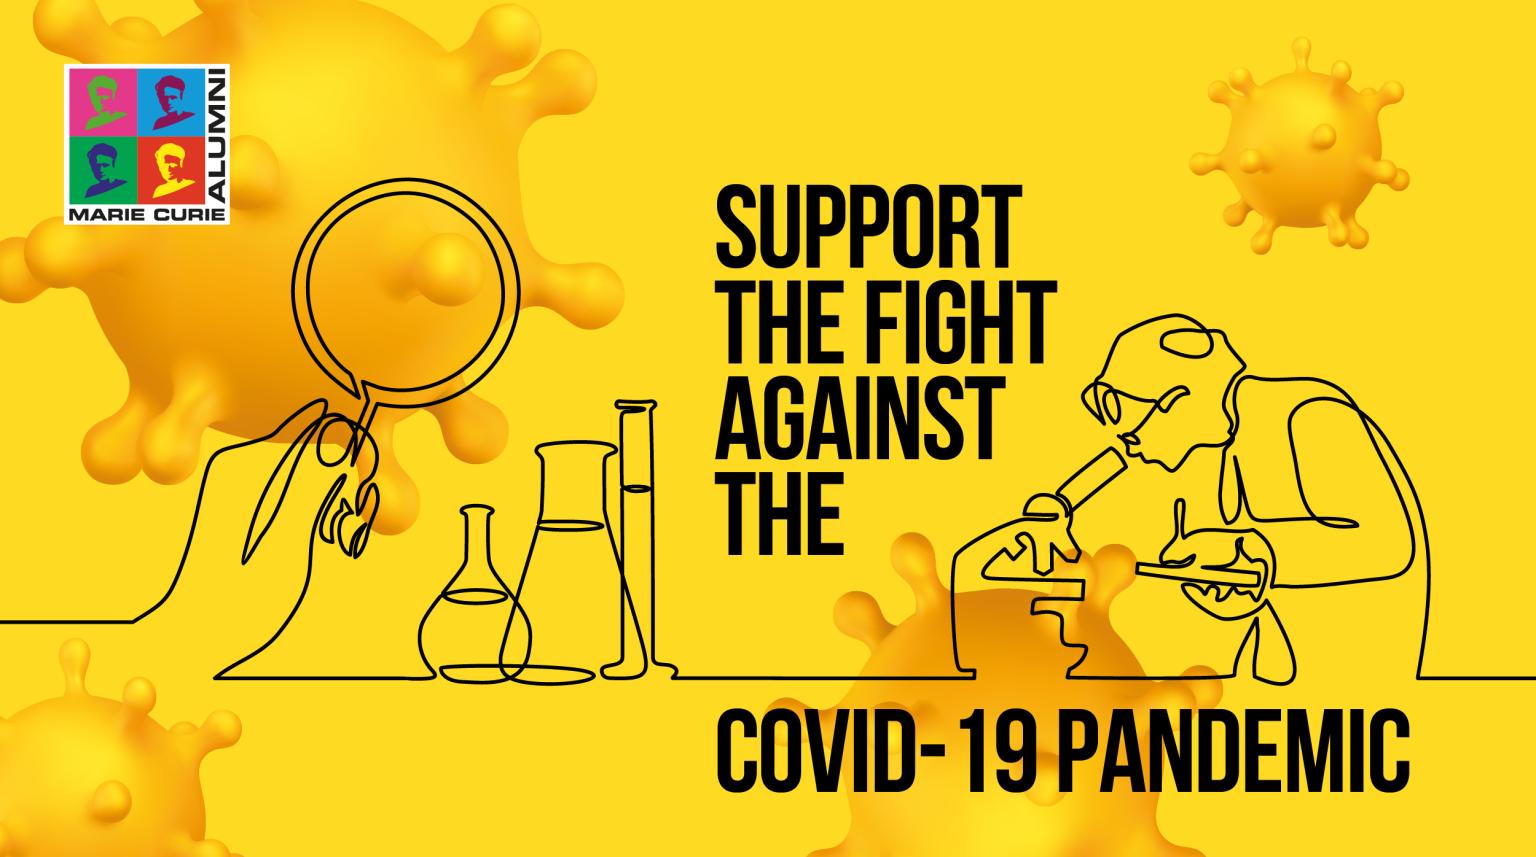 The Marie Curie fellows support the fight against COVID-19